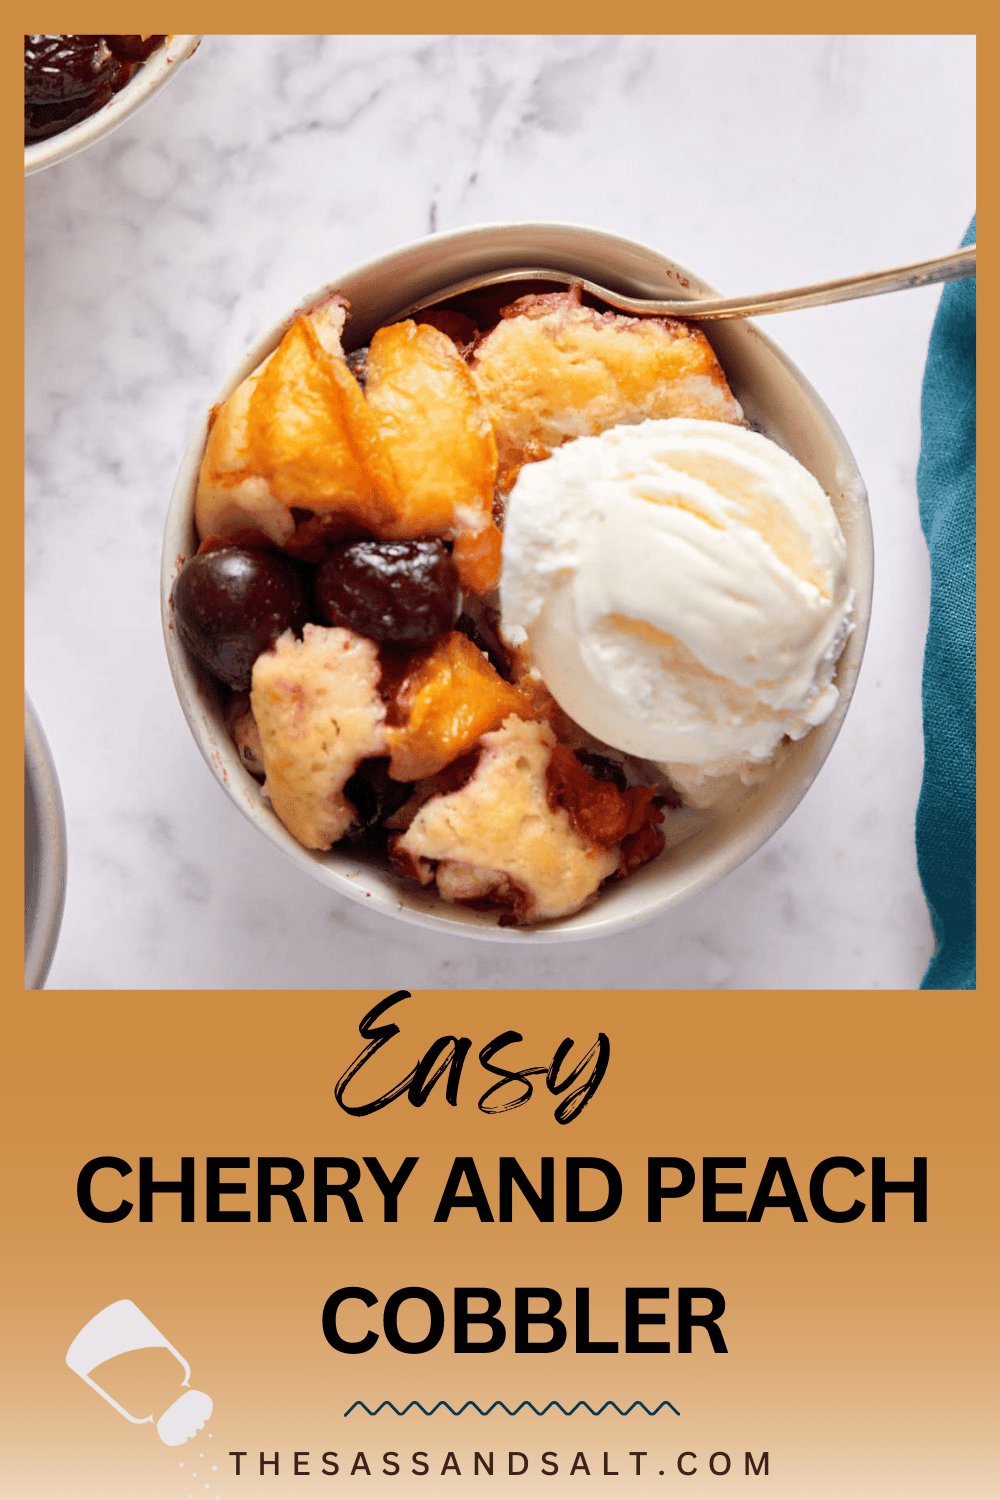 A bowl of cherry and peach cobbler topped with a scoop of vanilla ice cream, with "easy cherry and peach cobbler" text and a website url at the bottom.